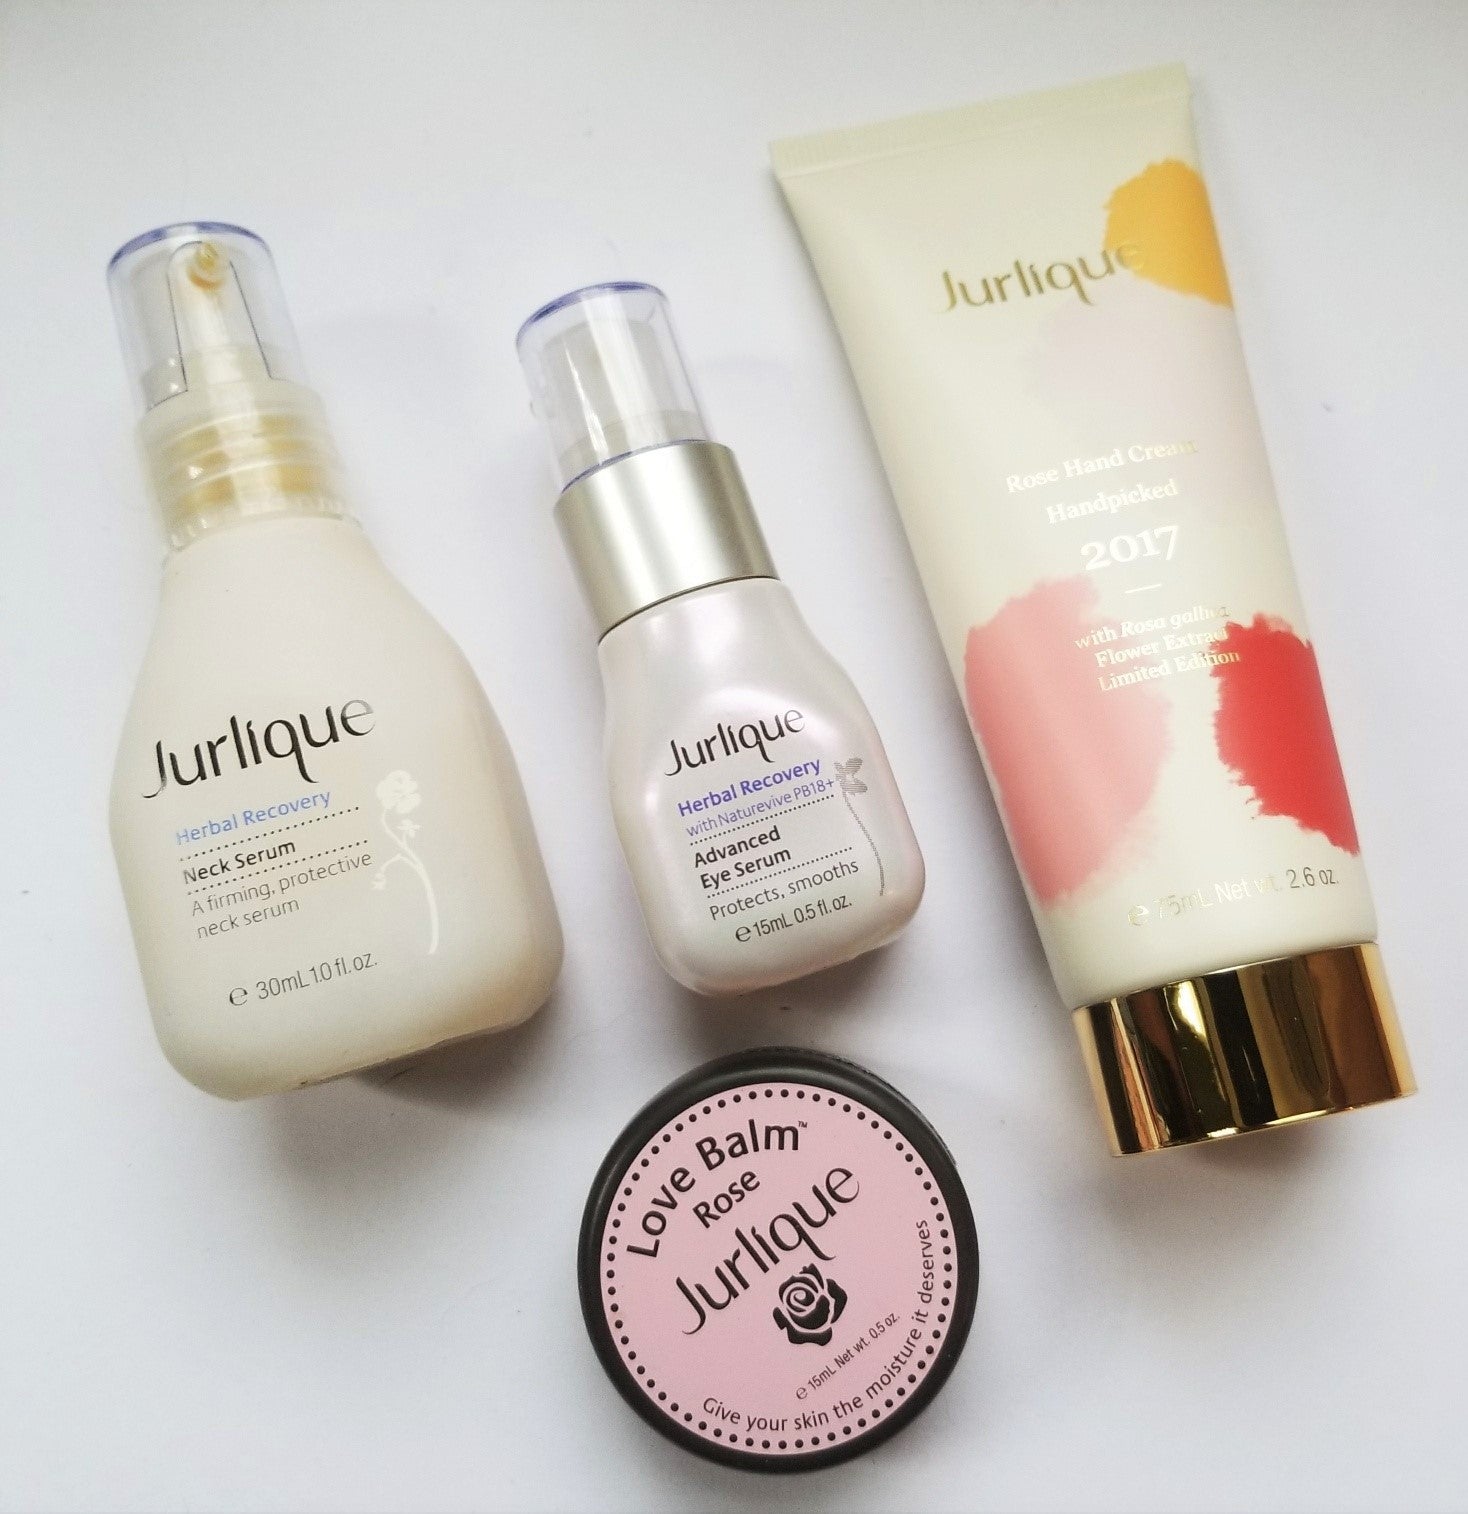 Review, Ingredients, Photos, Swatches, Skincare Trend 2017, 2018: Jurlique Herbal Recovery Neck Serum, Herbal Recovery Advanced Eye Serum, Rose Hand Cream Handpicked 2017, Love Balm Rose